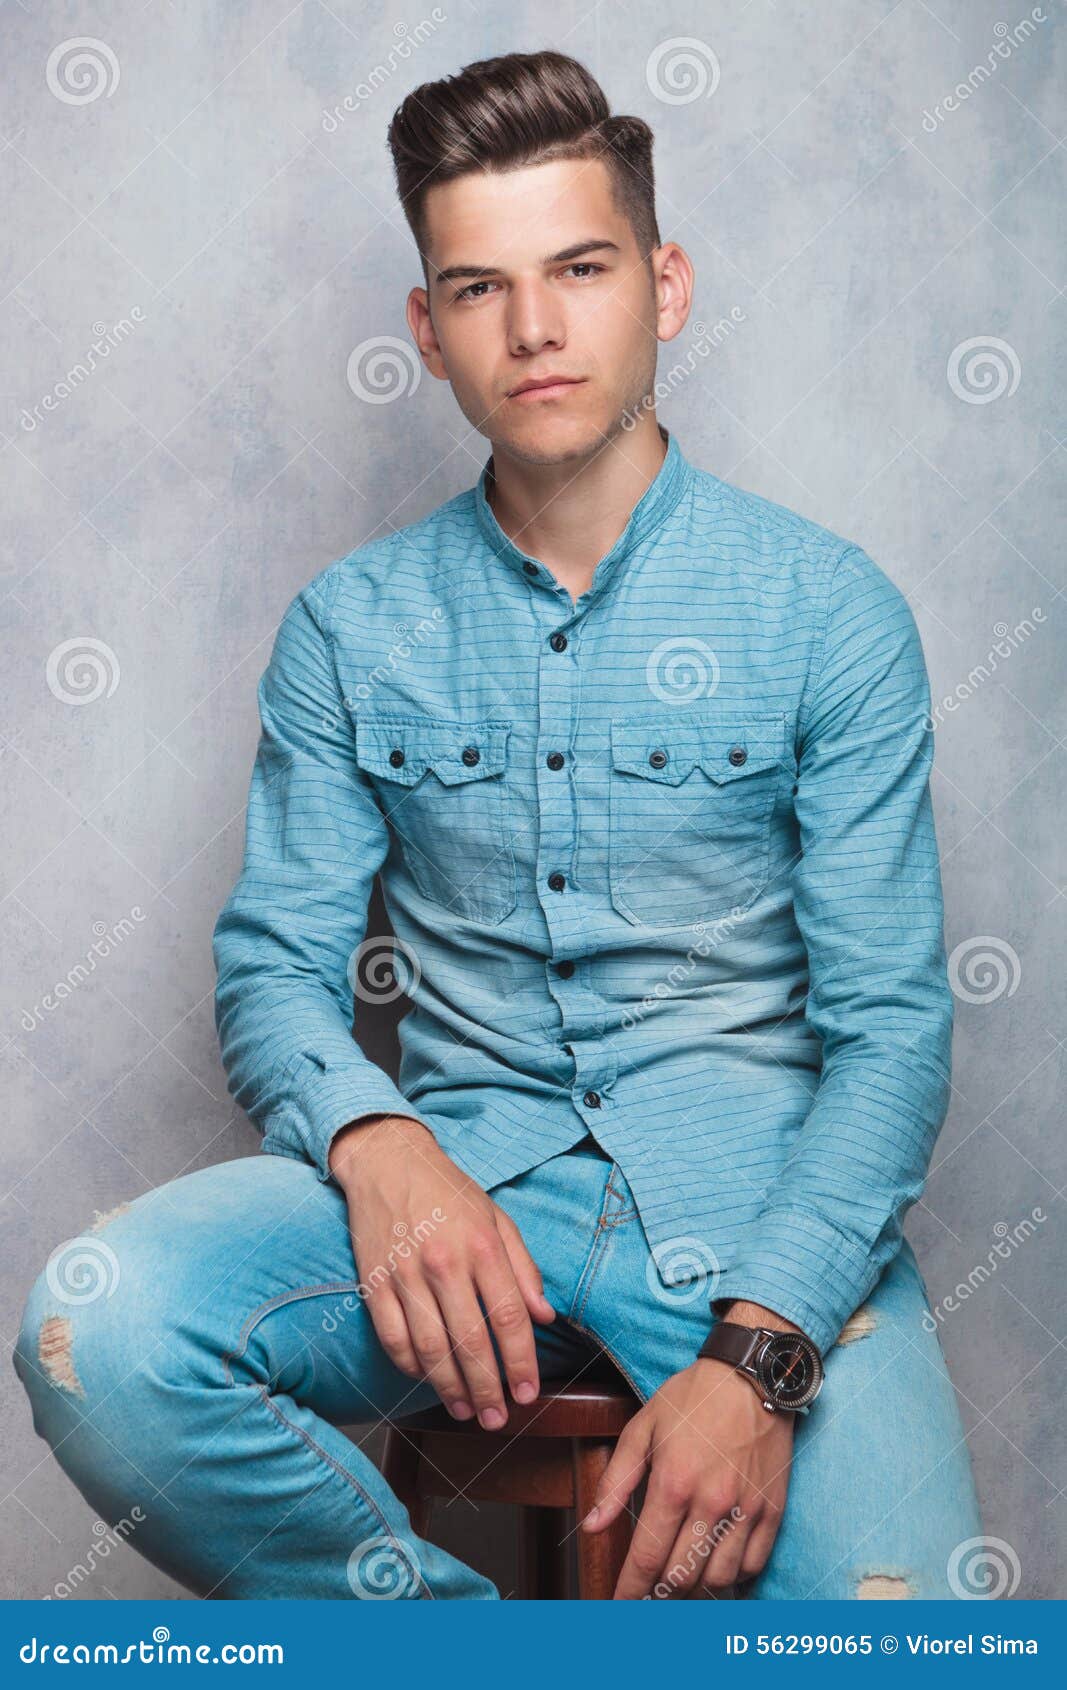 Portrait of a Young Man Siting on a Chair Stock Image - Image of look ...